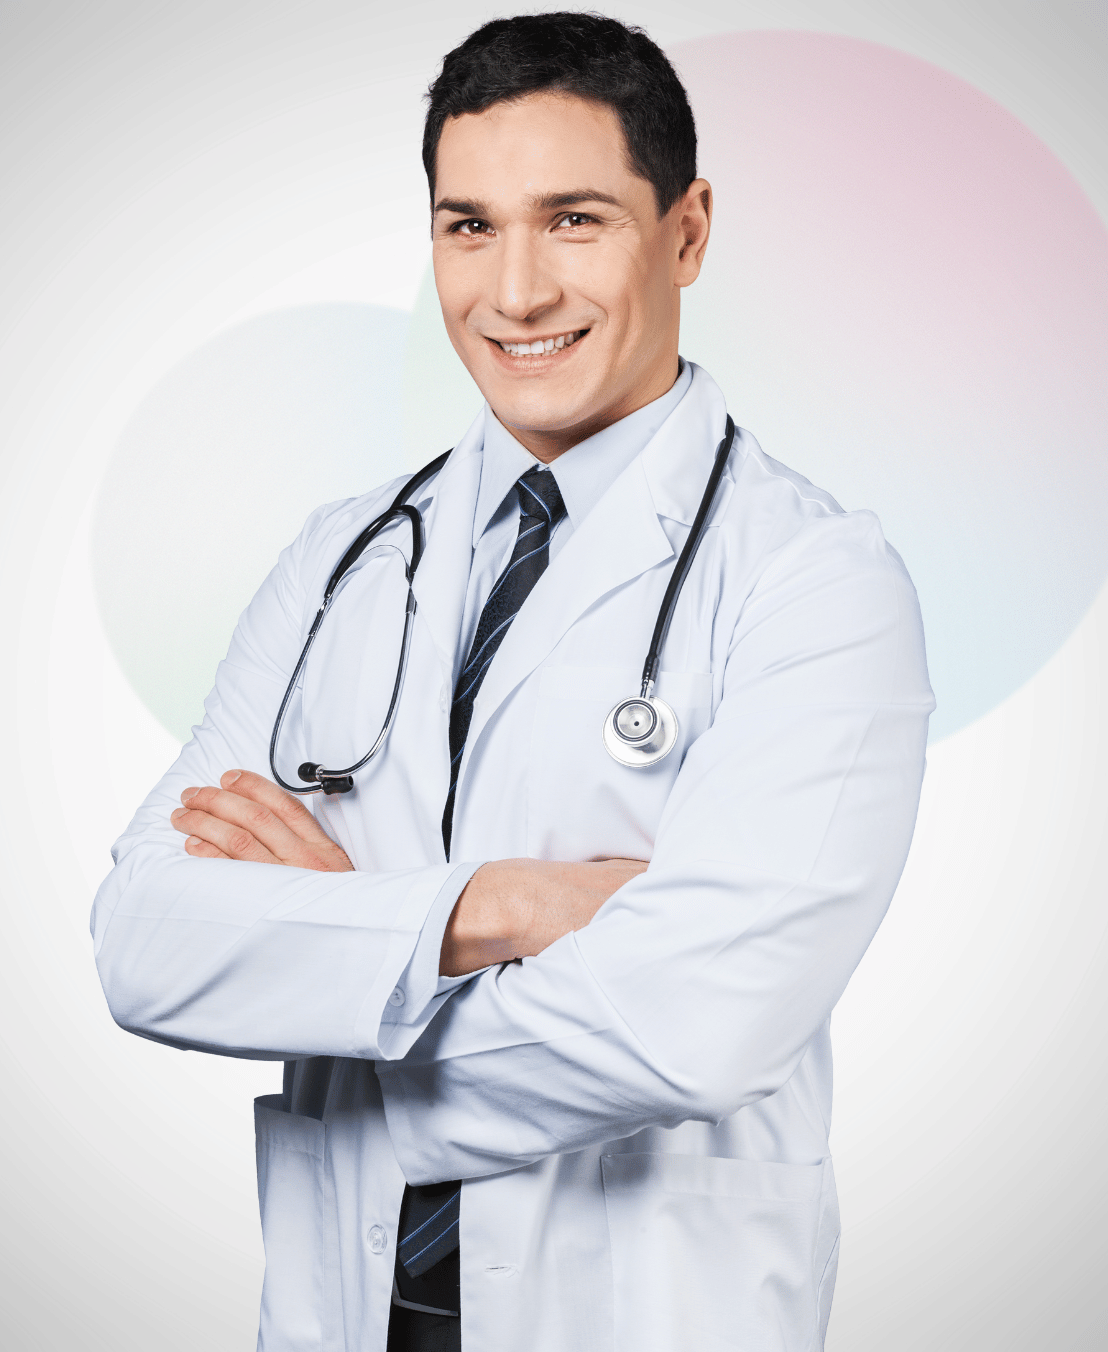 Image of a doctor